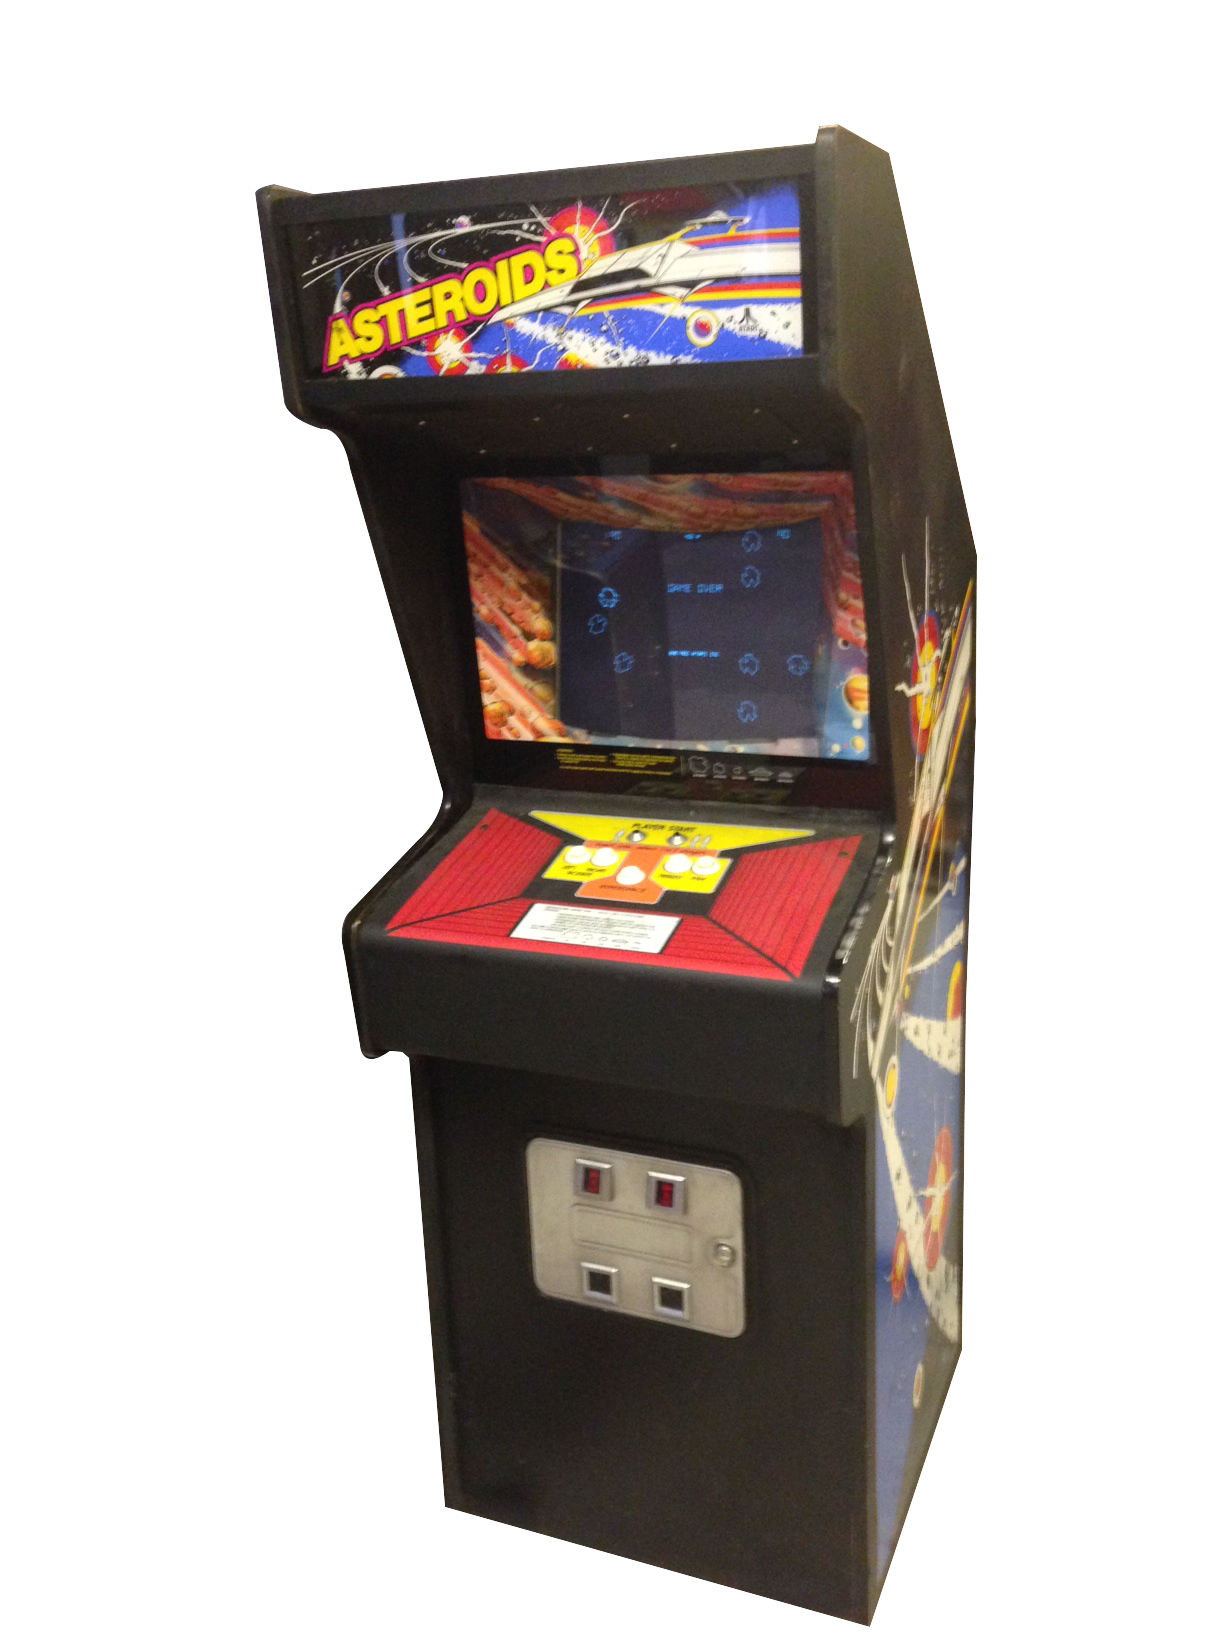 Asteroids Arcade Machine For Hire | Hire Arcade Games | AMH UK1224 x 1632